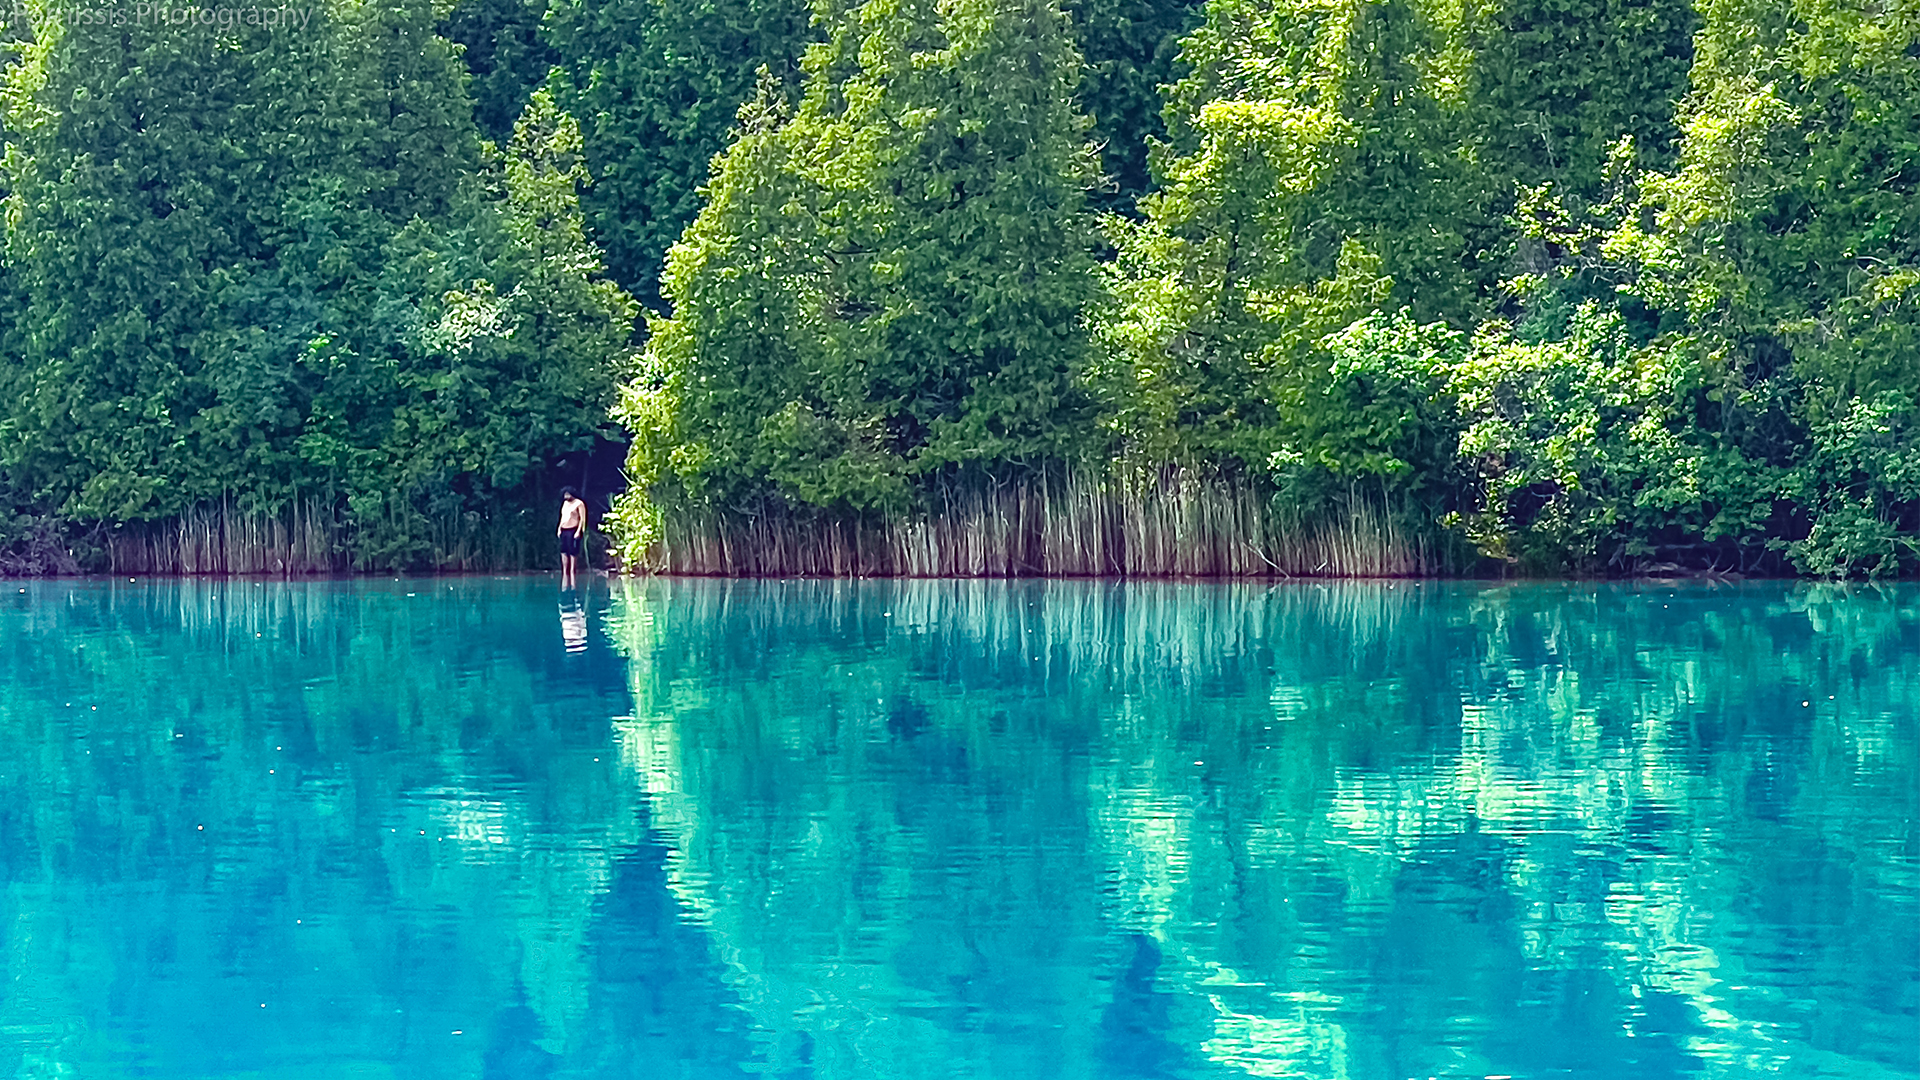 The US city park boasts a lake that is the same color as the Caribbean Sea